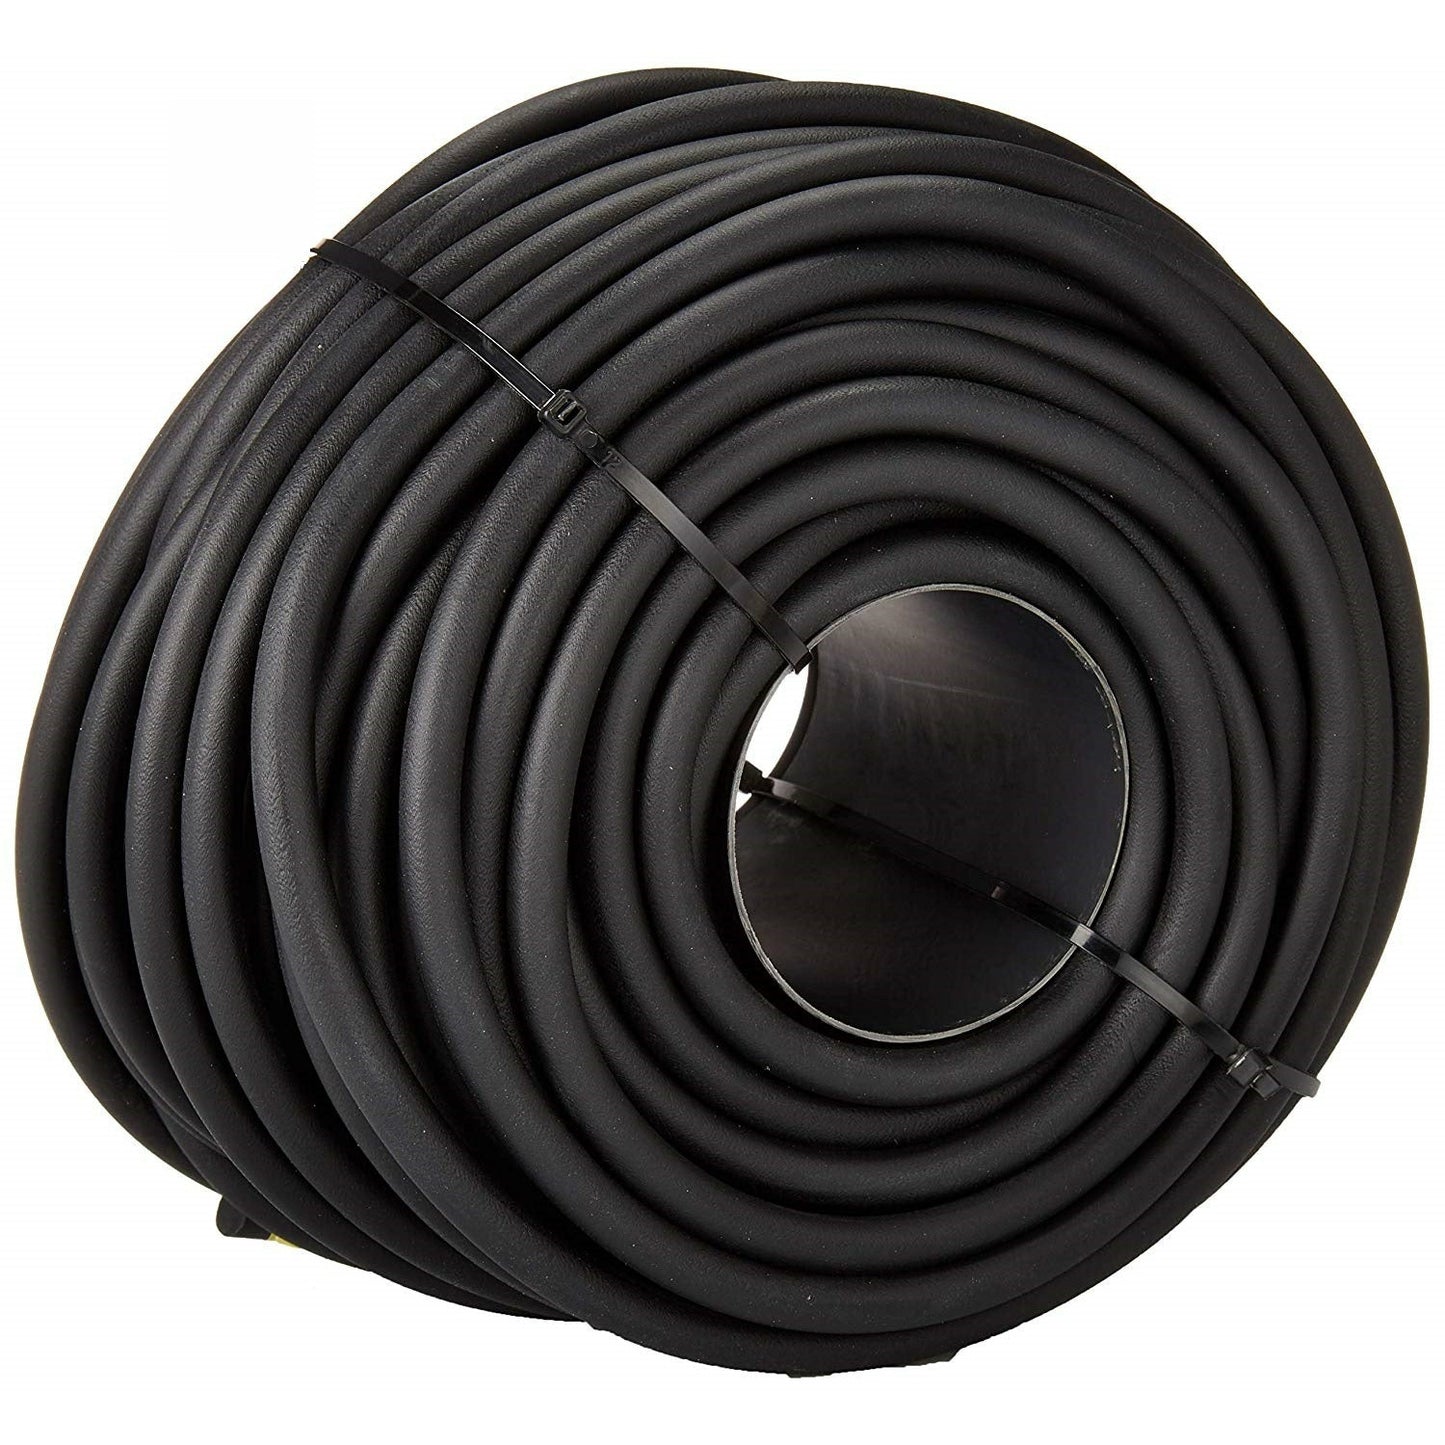 Rubber Rope Cord - 150 Foot Length Spool